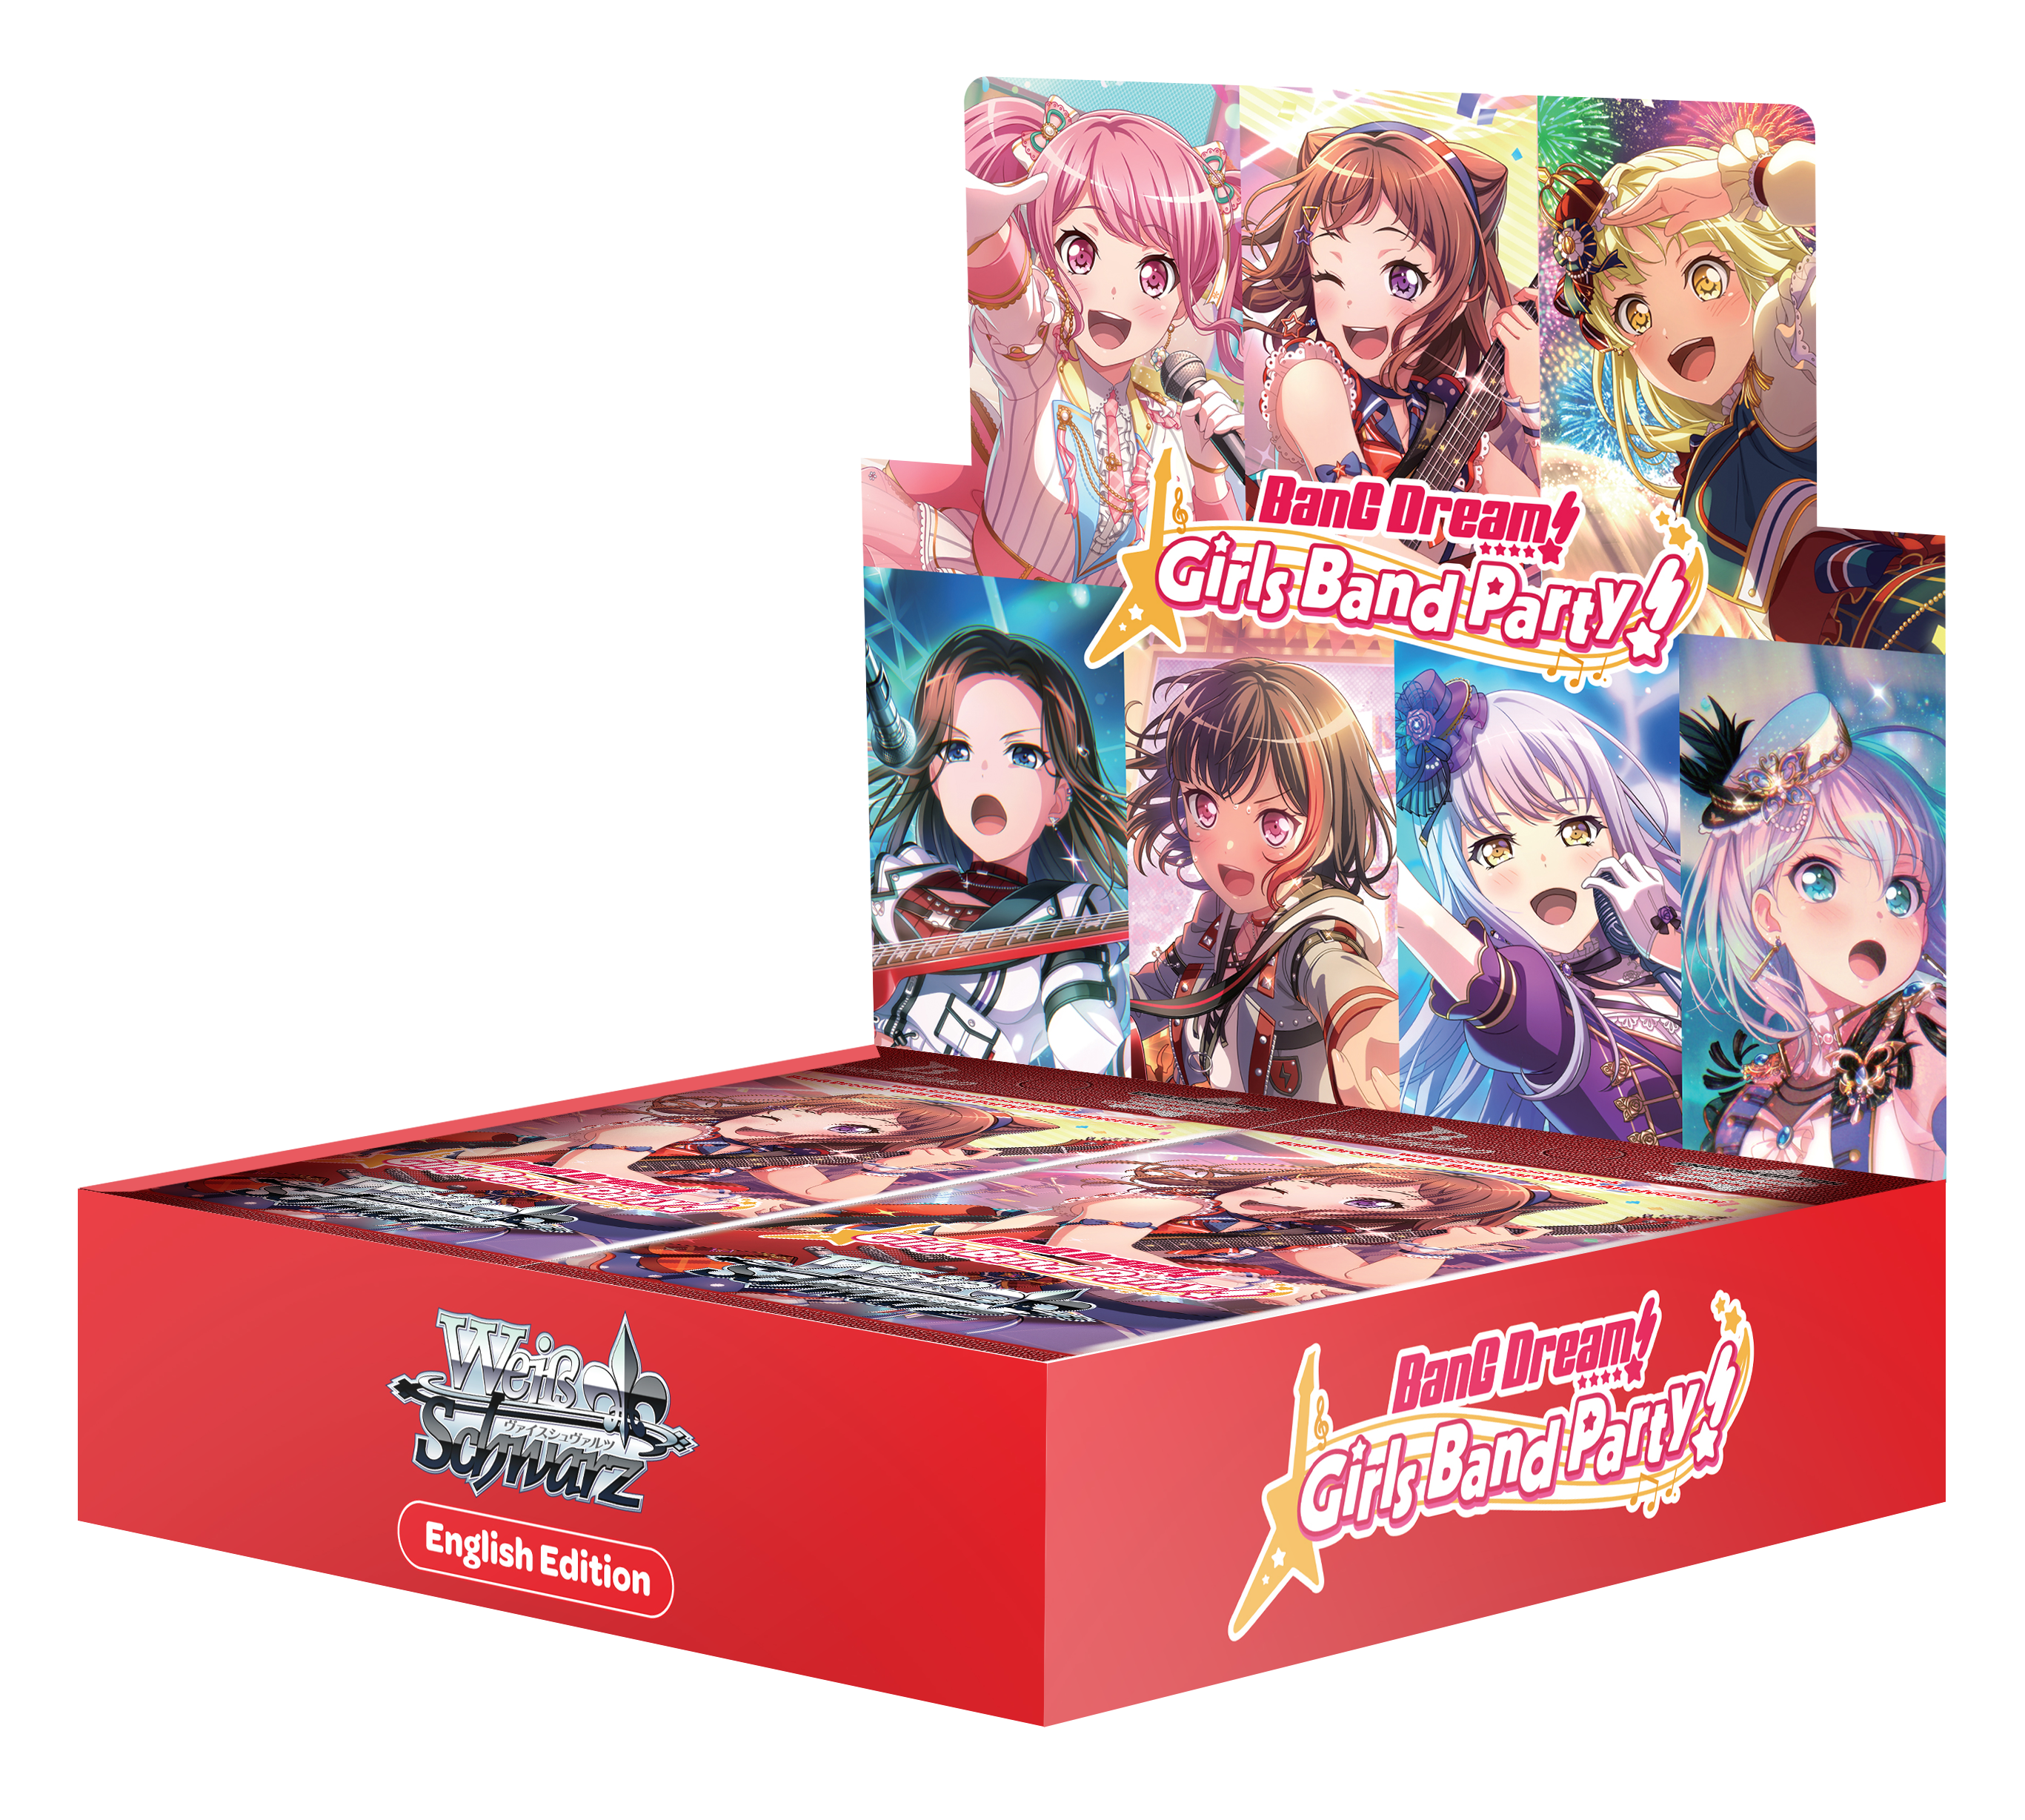 Weiss Schwarz - BanG Dream! Girls Band Party! 5th Anniversary - Booster Pack